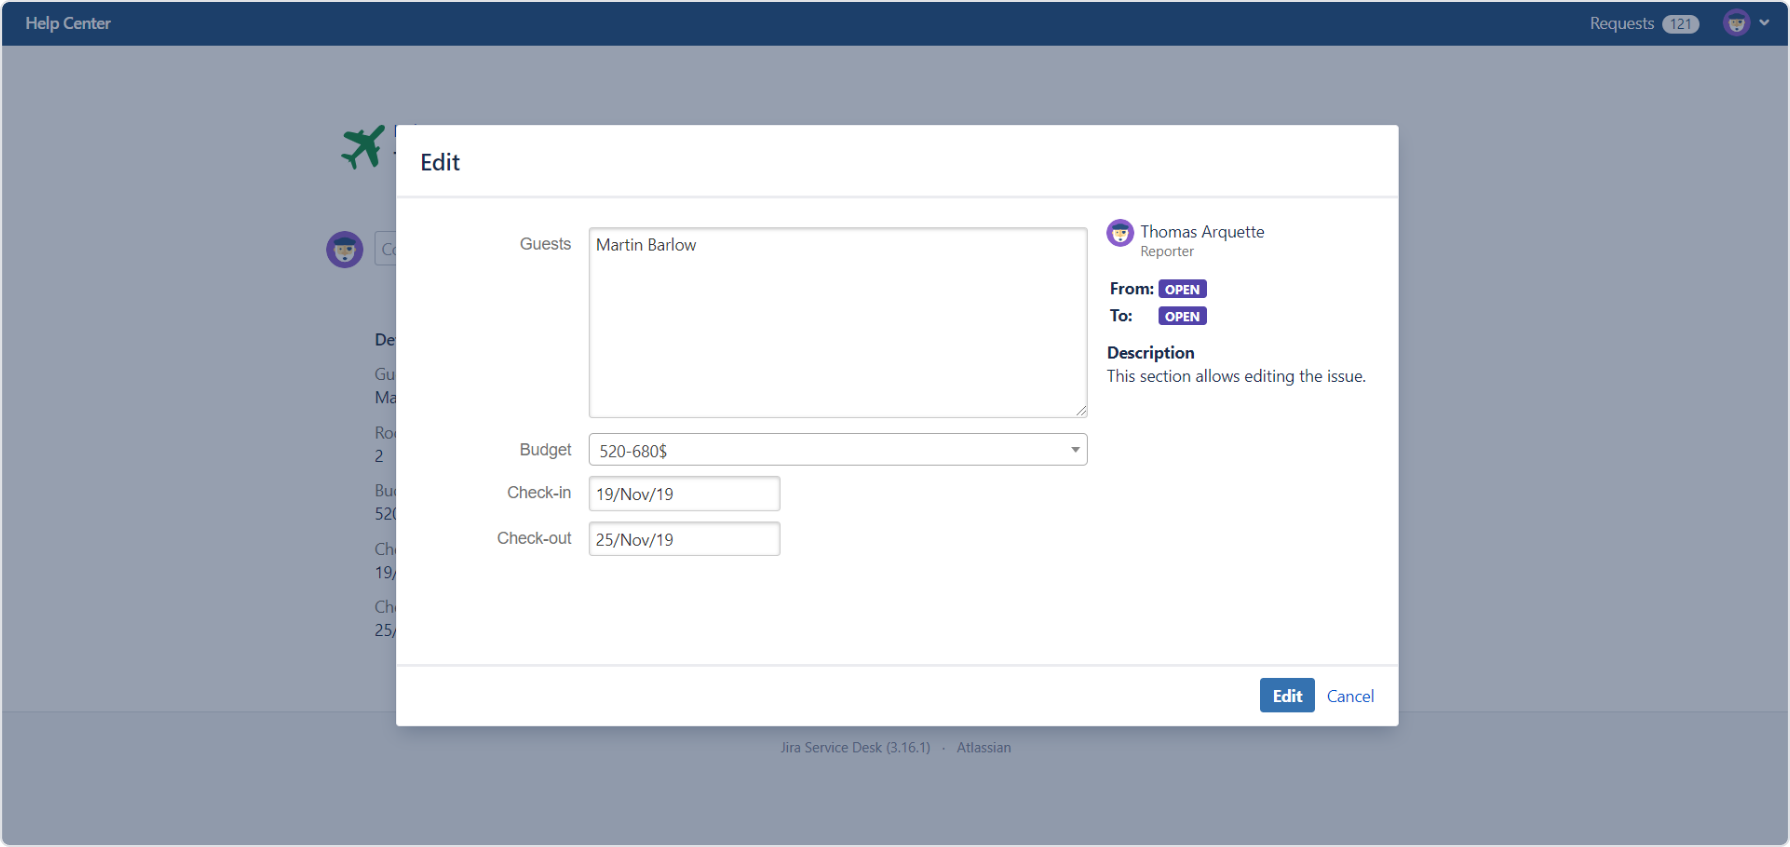 Removed Rooms field on the Customer Portal with Actions for Jira Service Management app